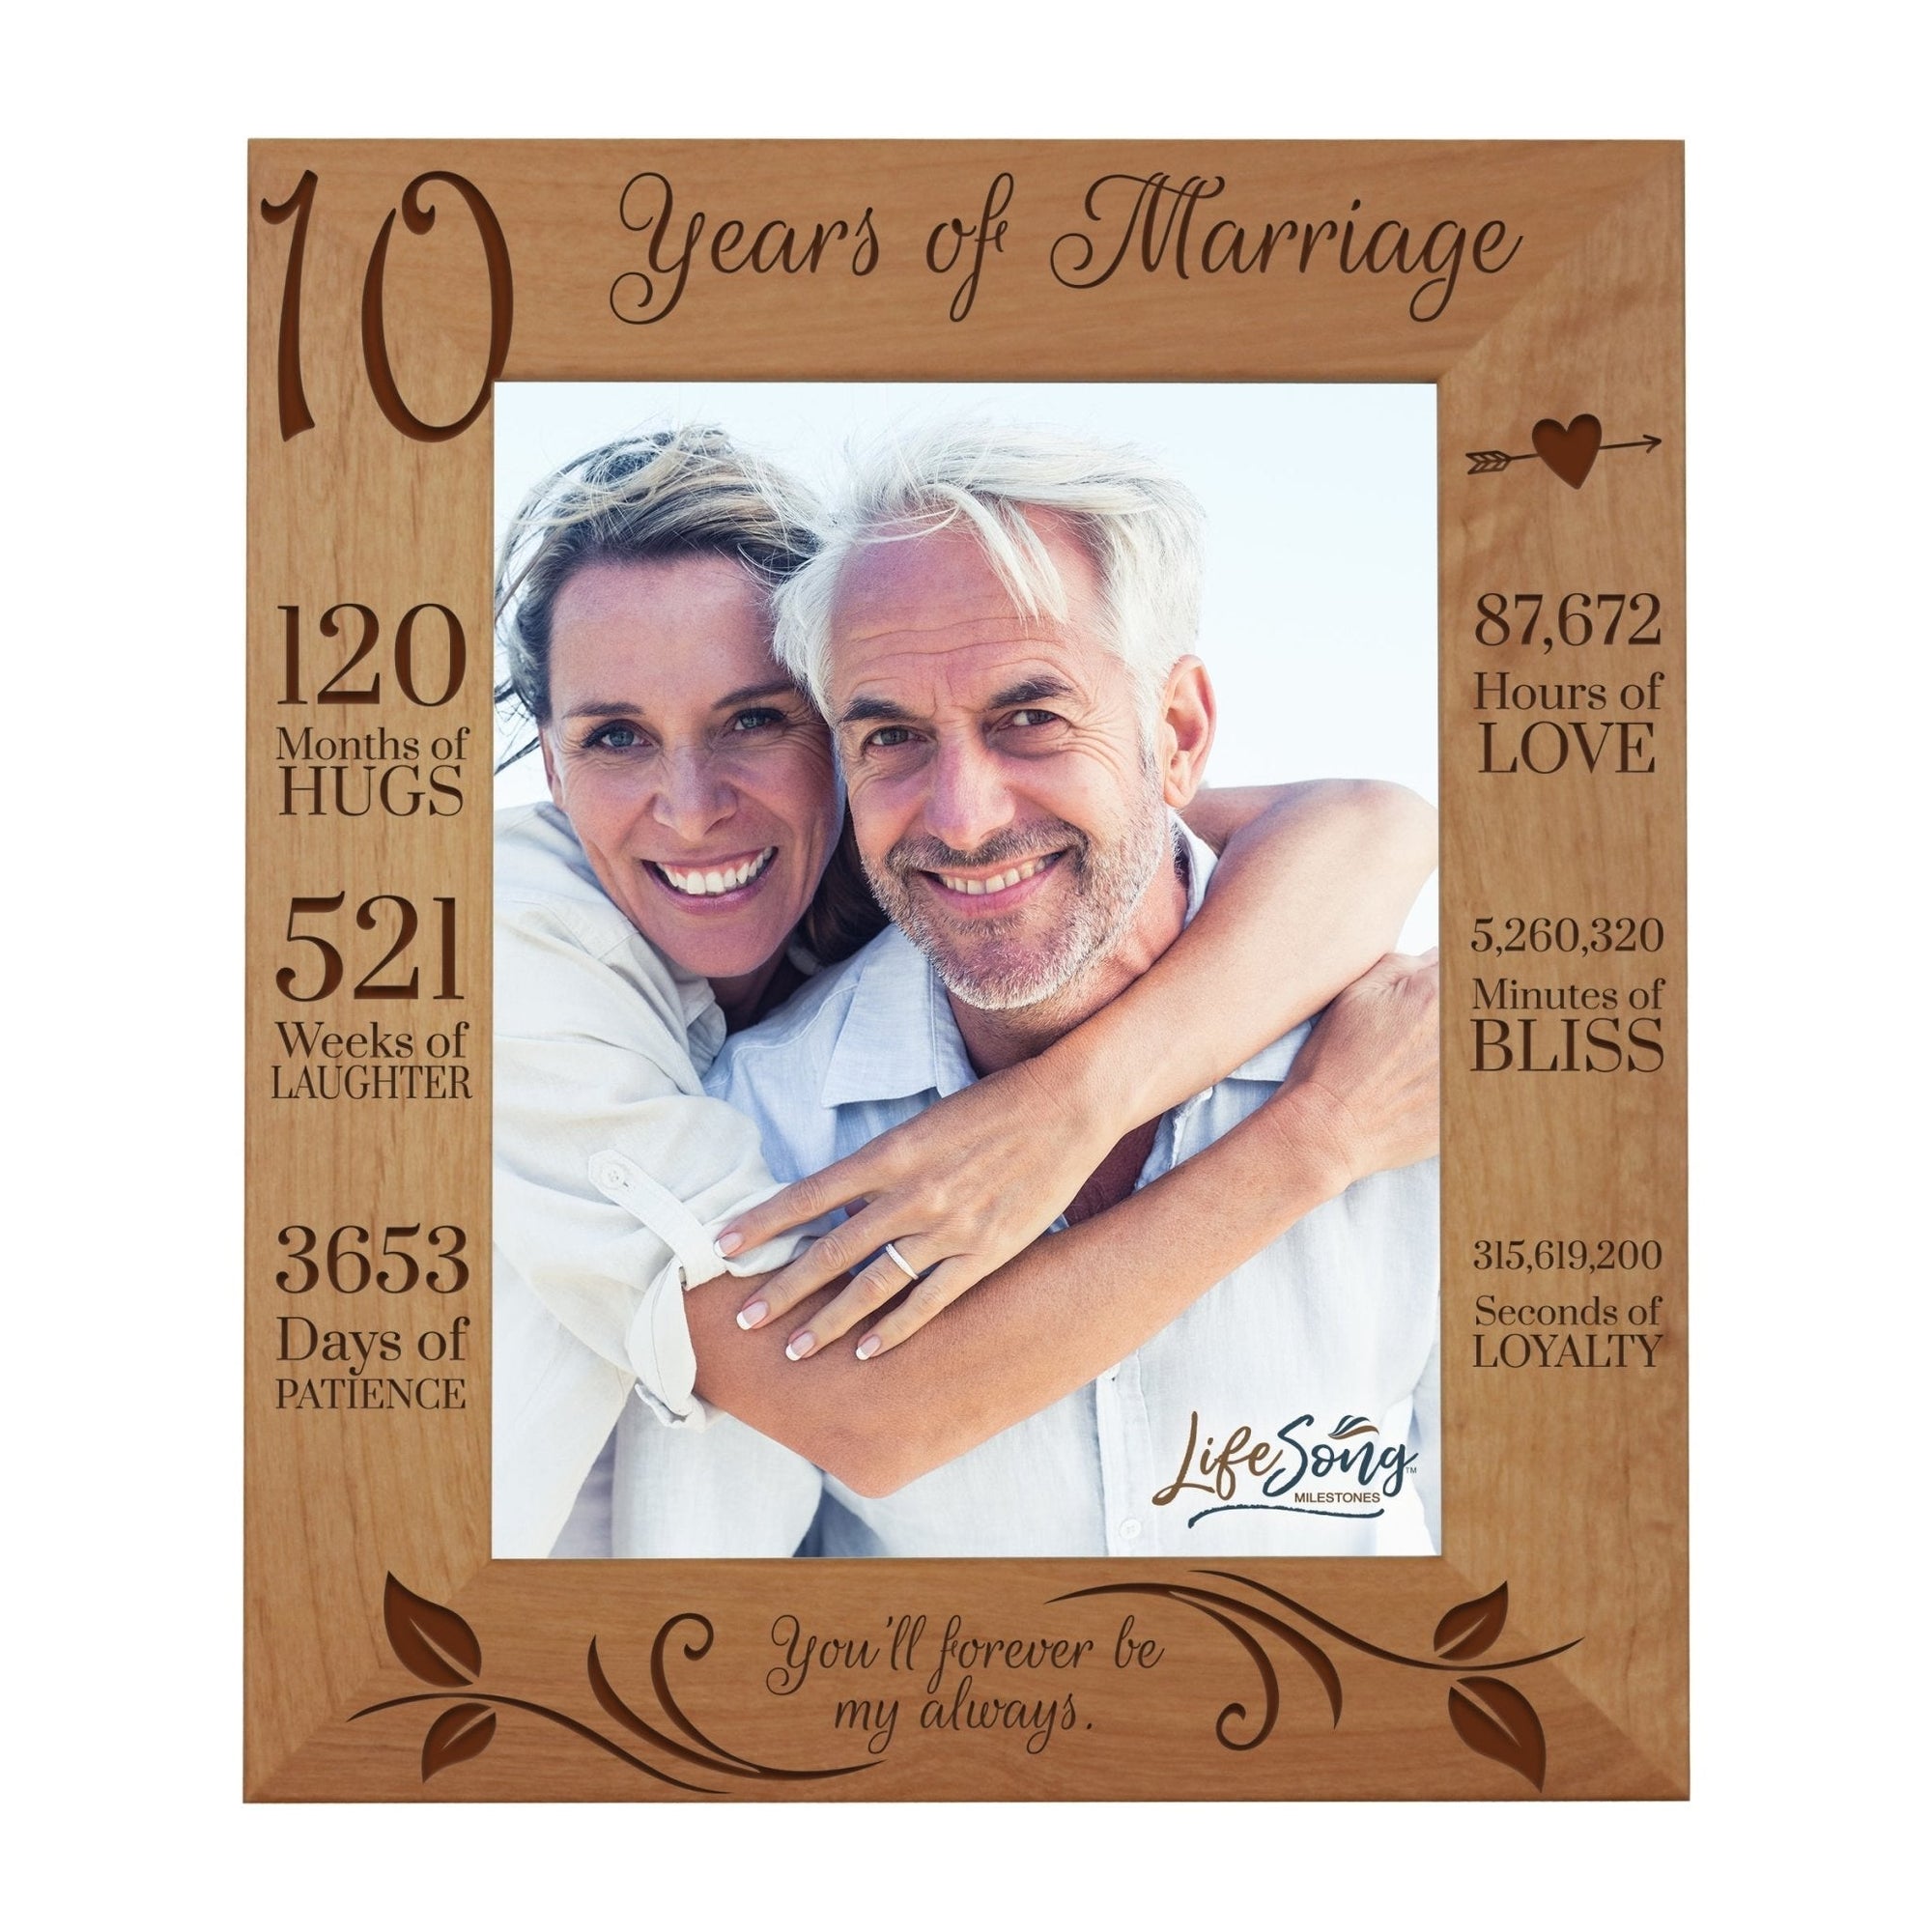 Couples 10th Wedding Anniversary Photo Frame Home Decor Gift Ideas - Forever Be My Always - LifeSong Milestones